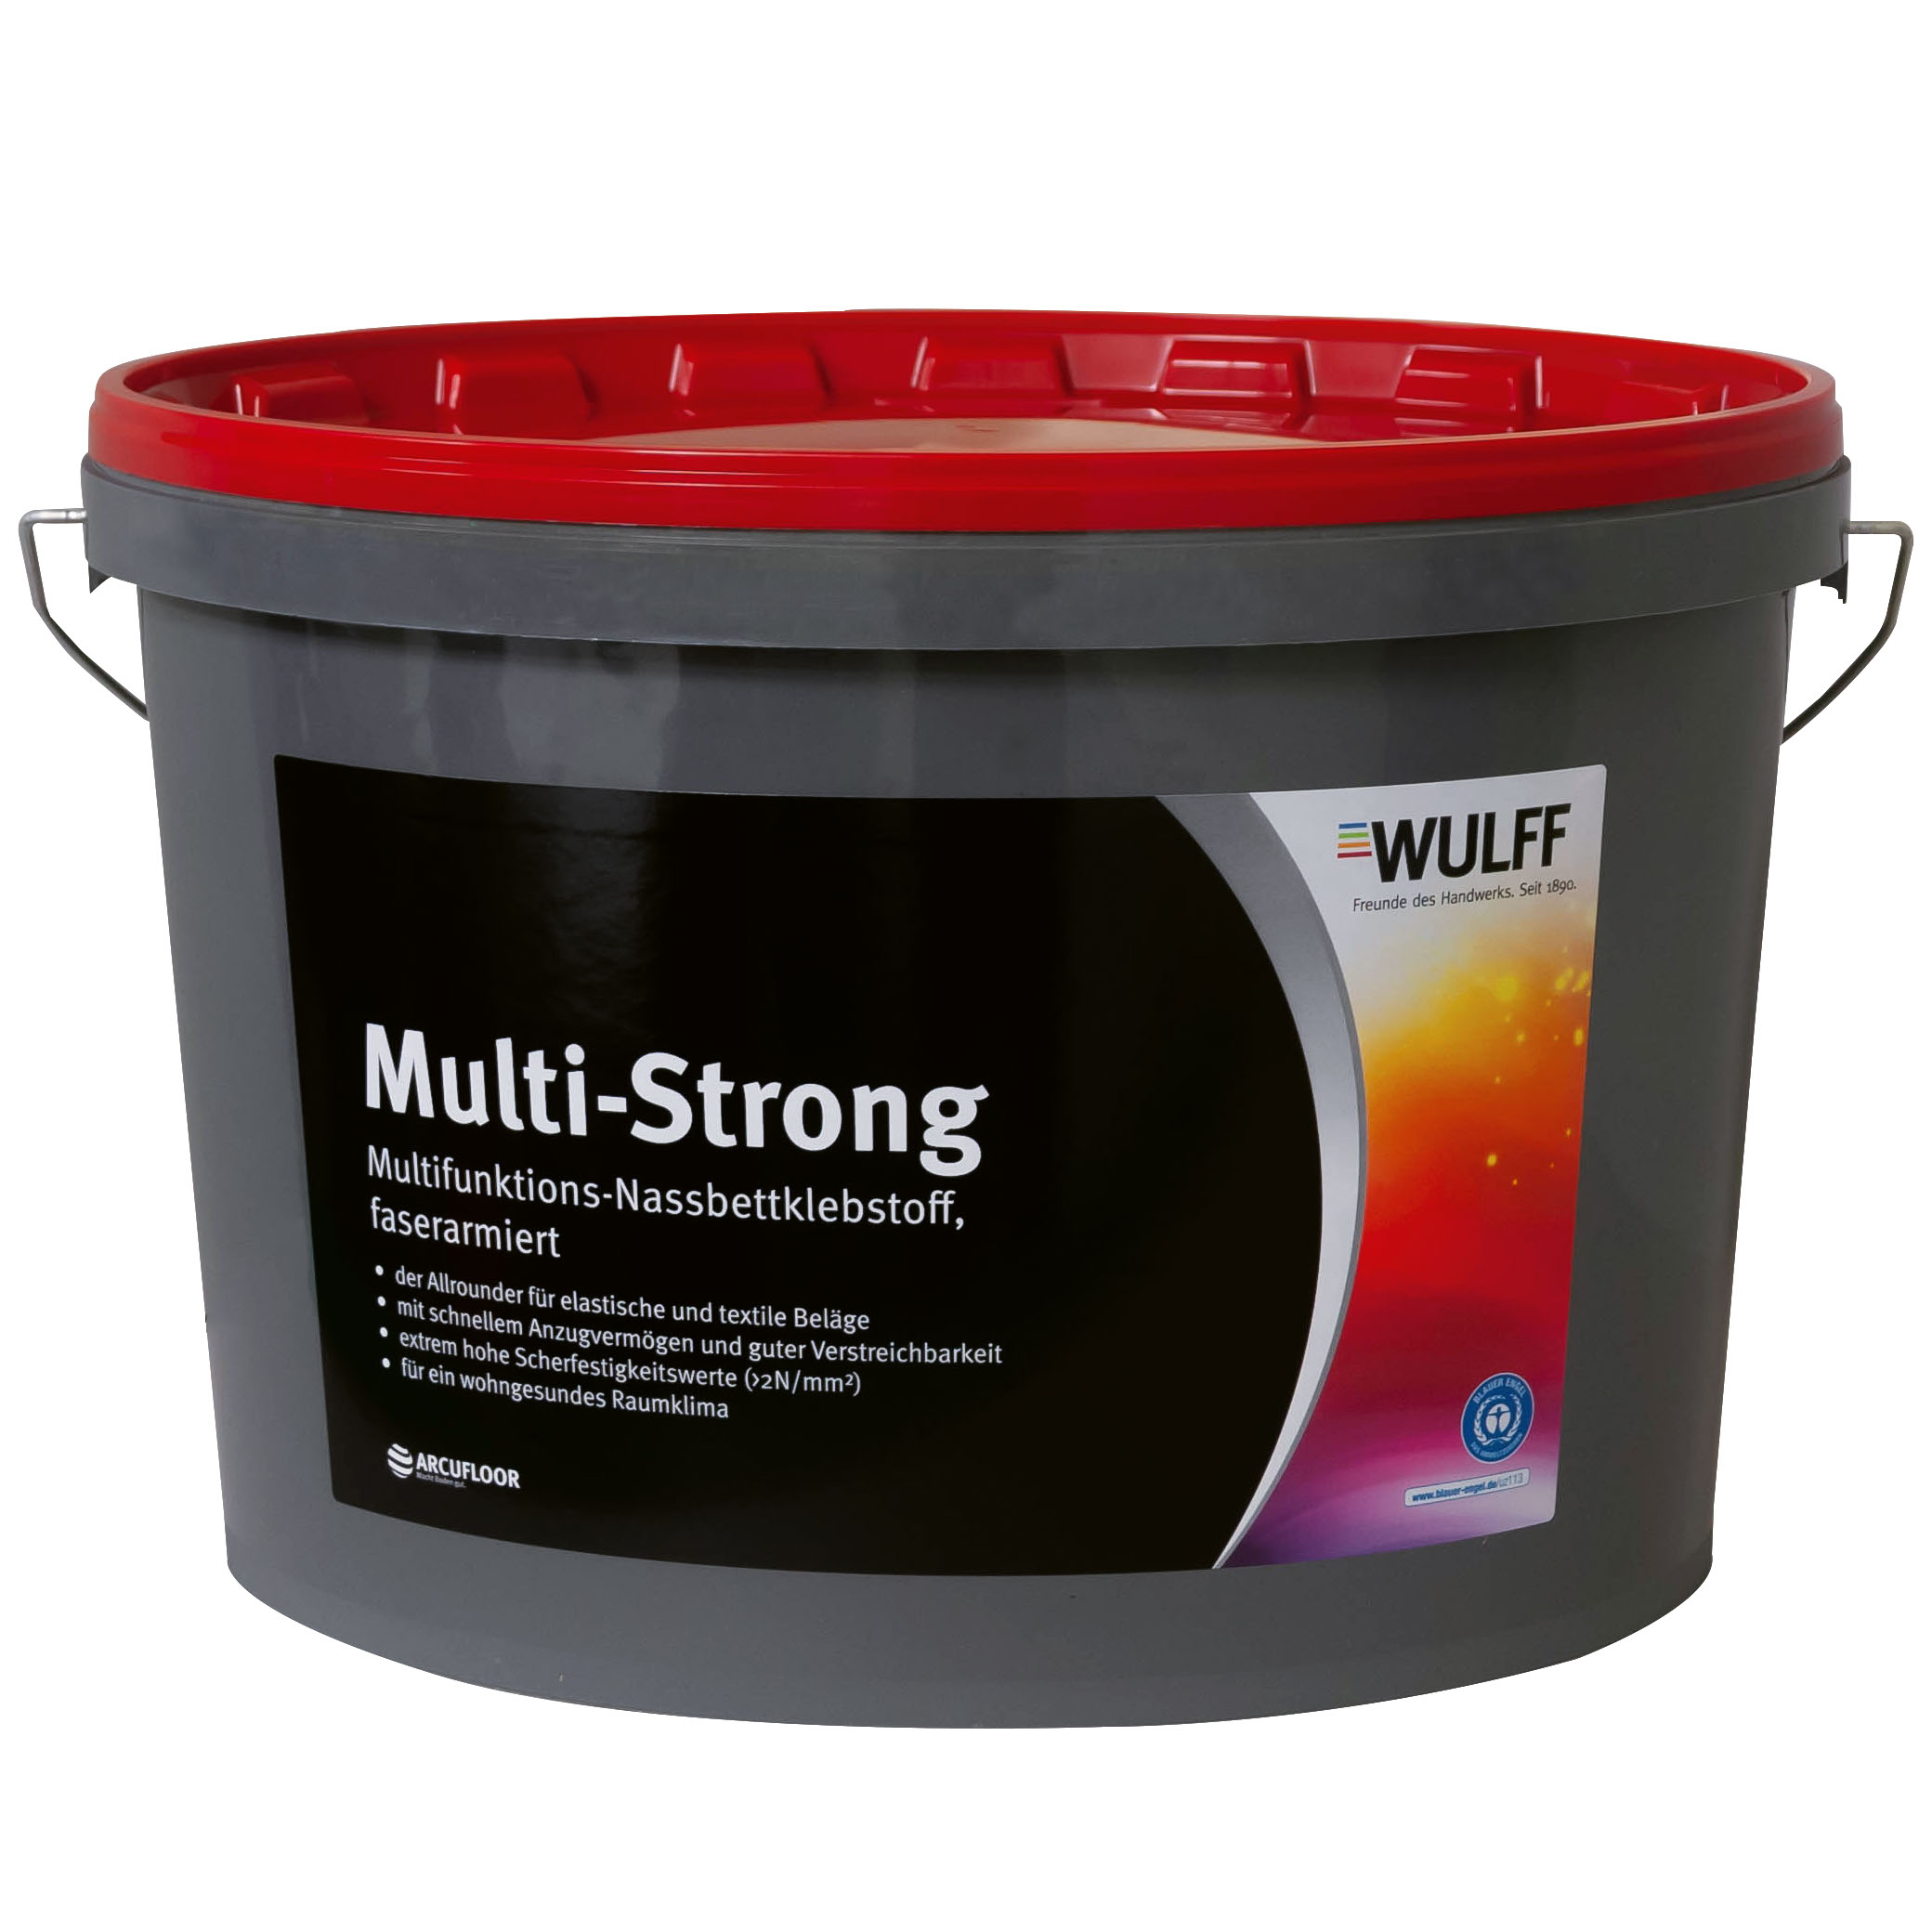 Multi-Strong